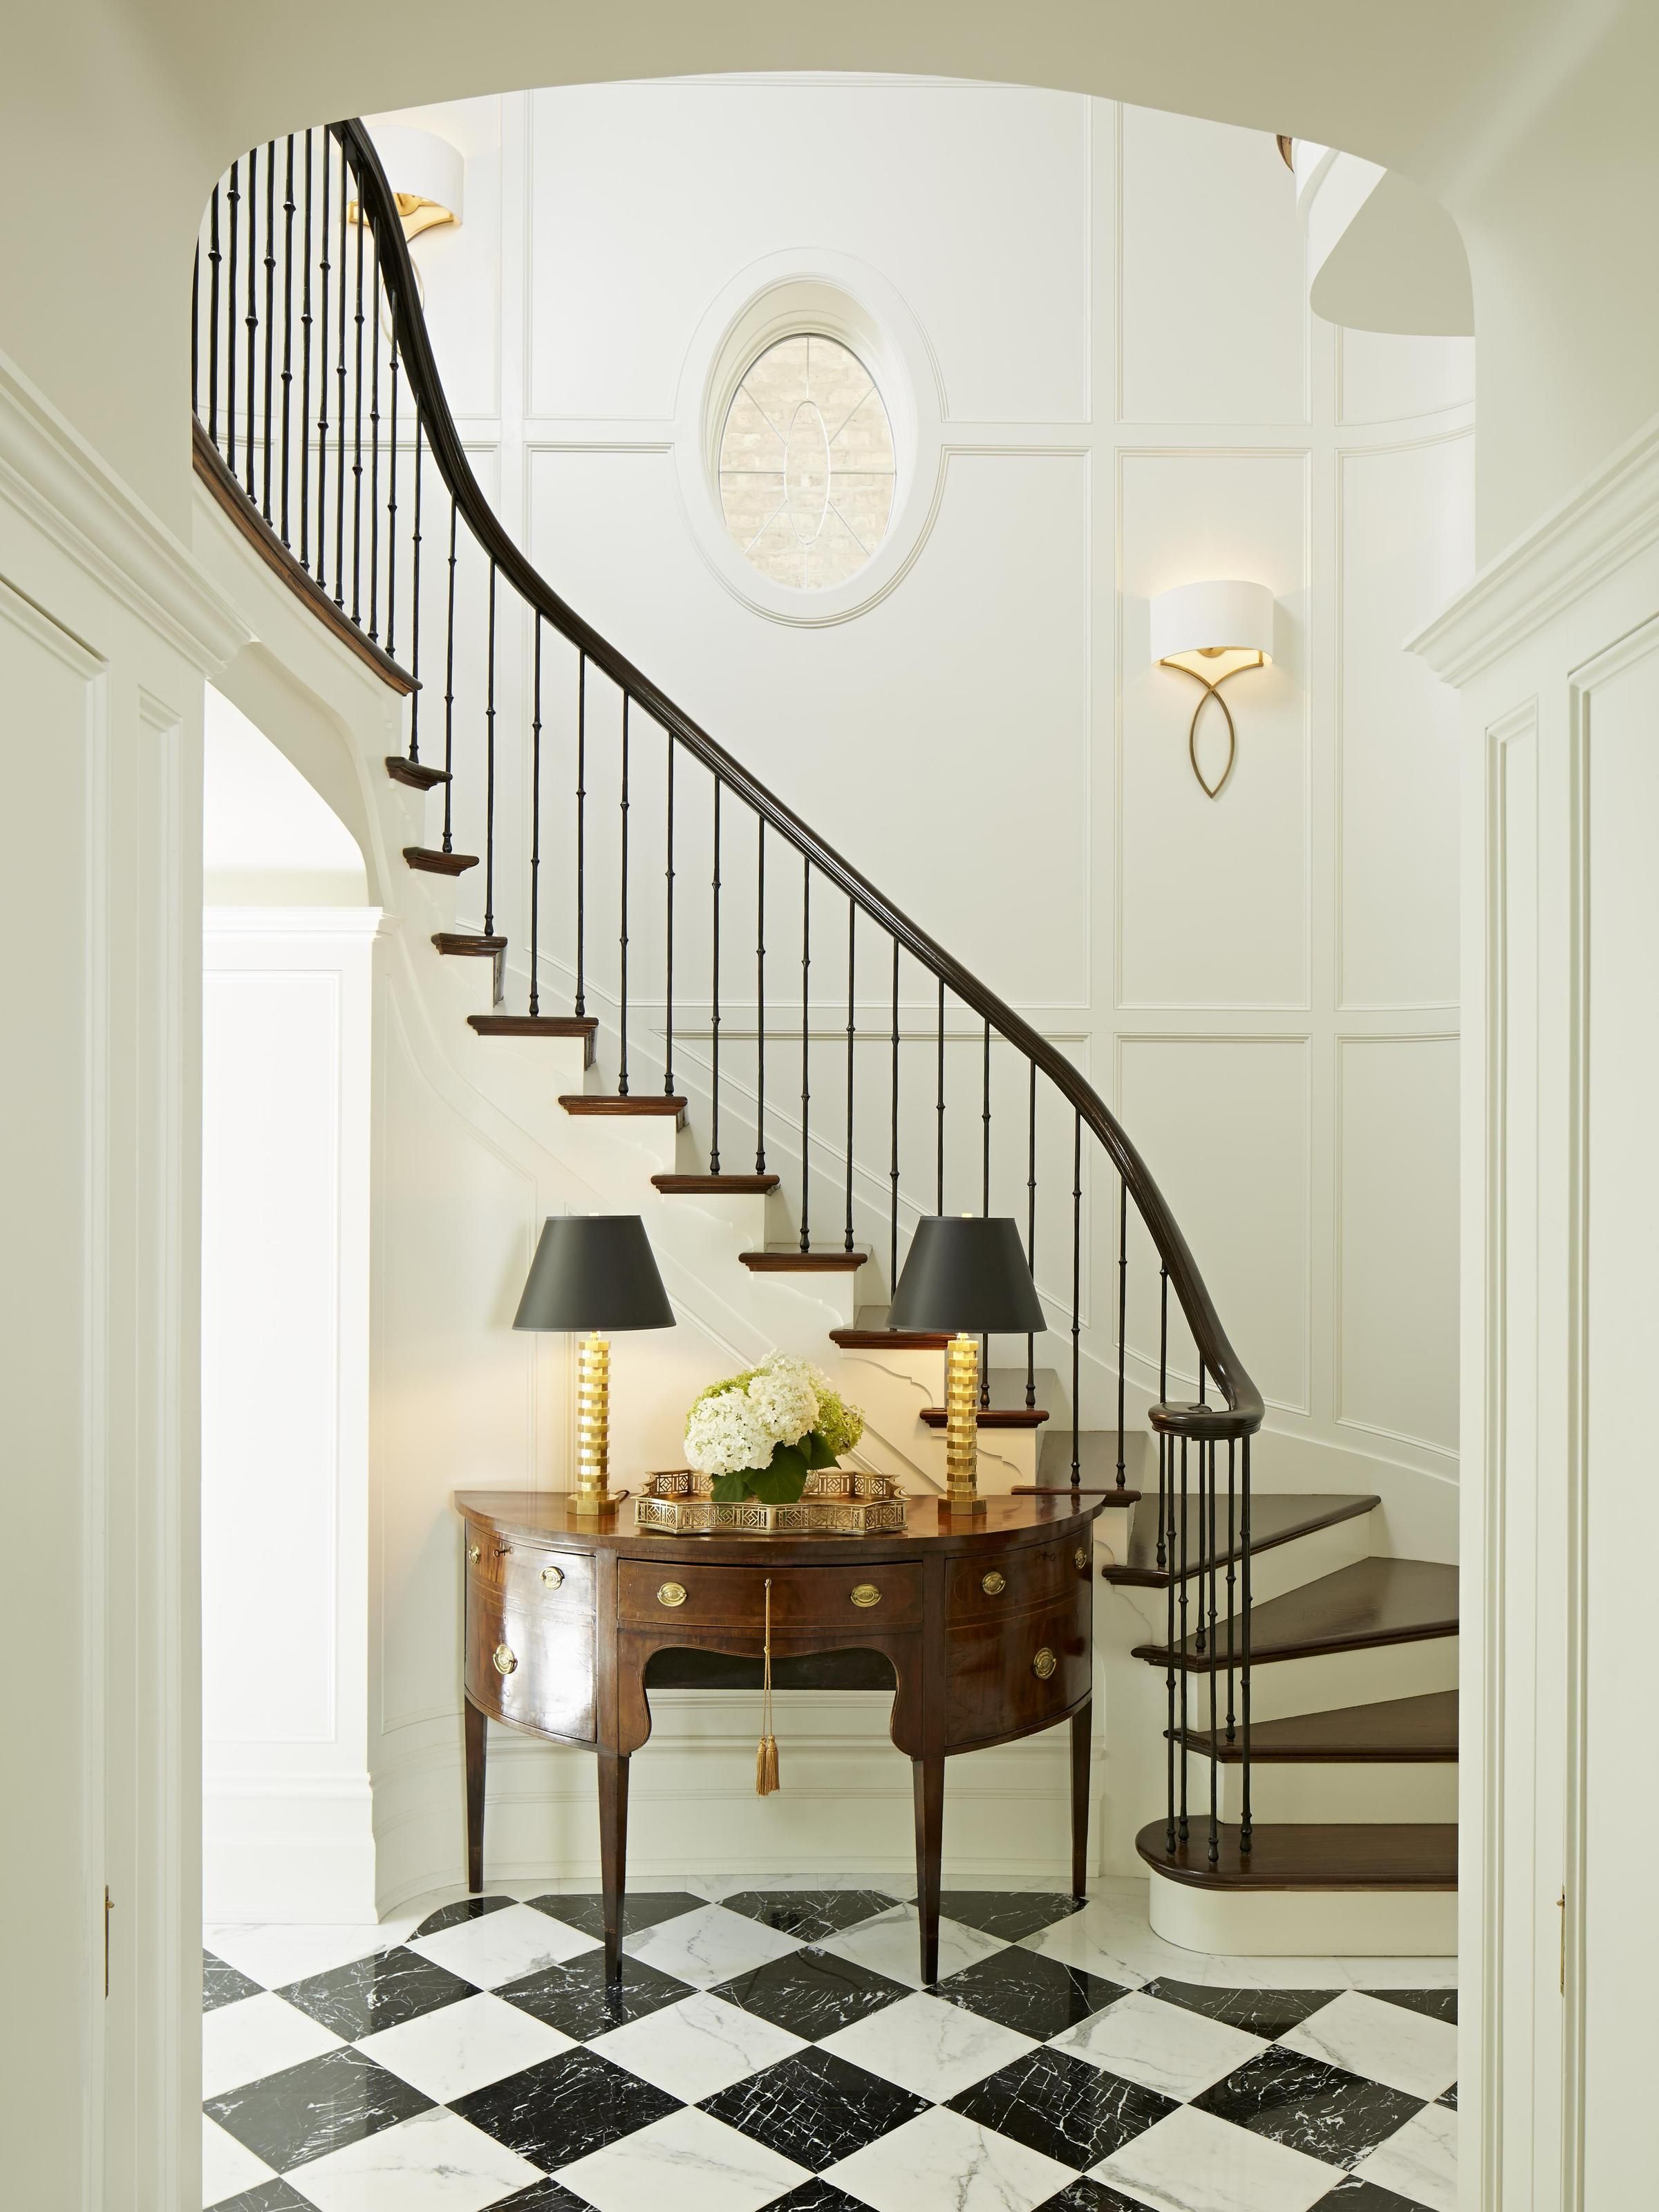 25 Grand Foyers With High Ceilings - Entryways With High Ceilings